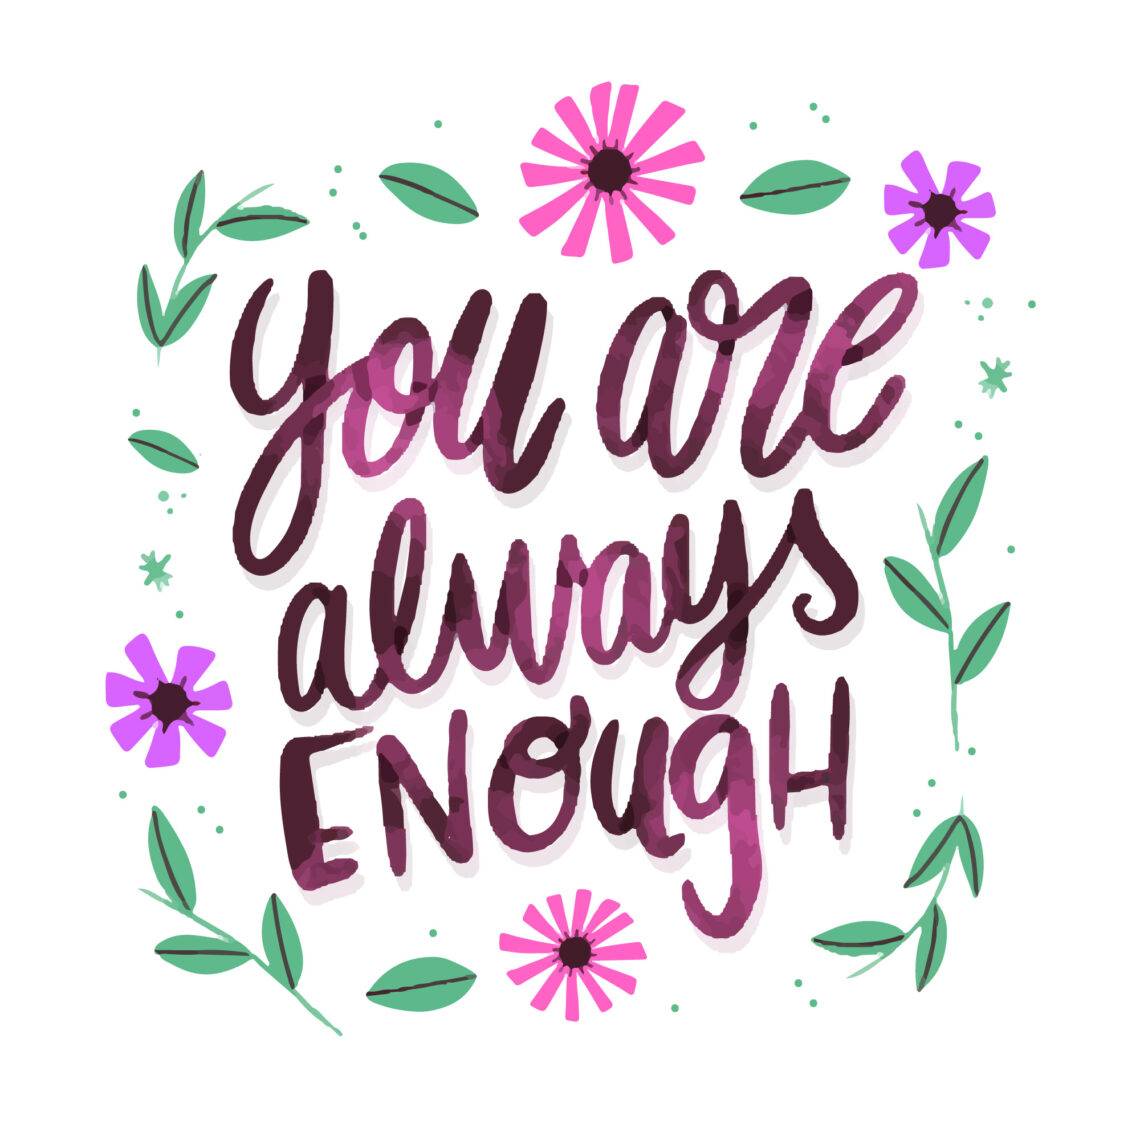 You are always enough